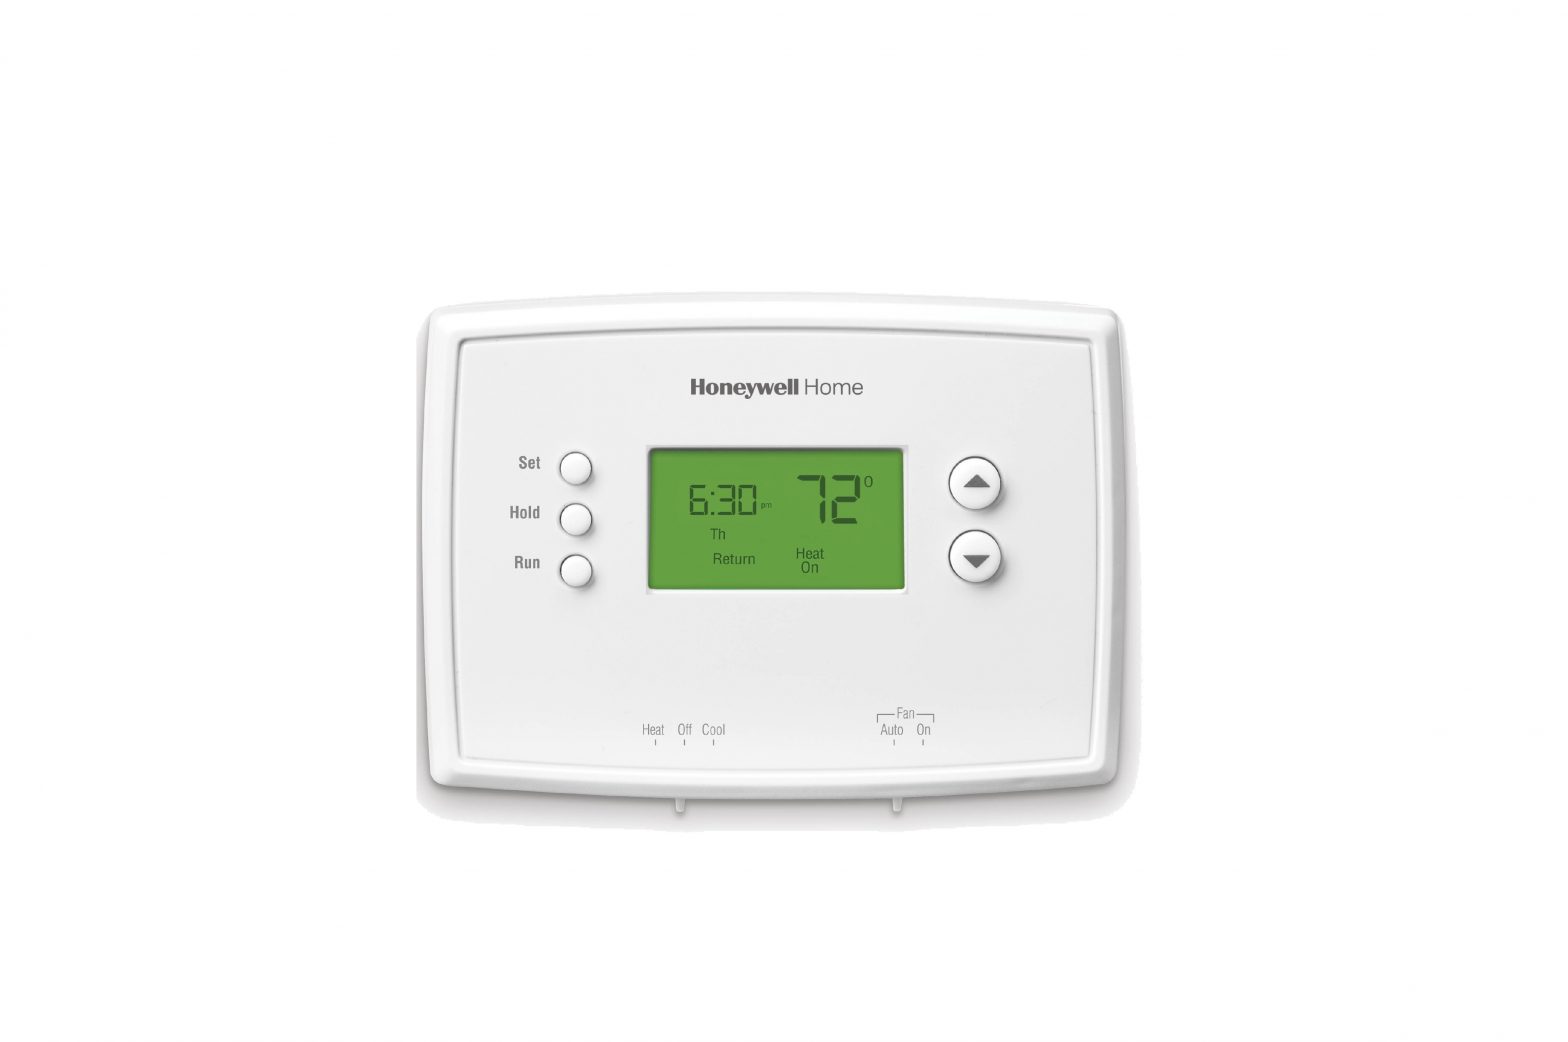 Honeywell RTHL2310/RTHL221 Series Programmable Thermostat Owner’s Manual